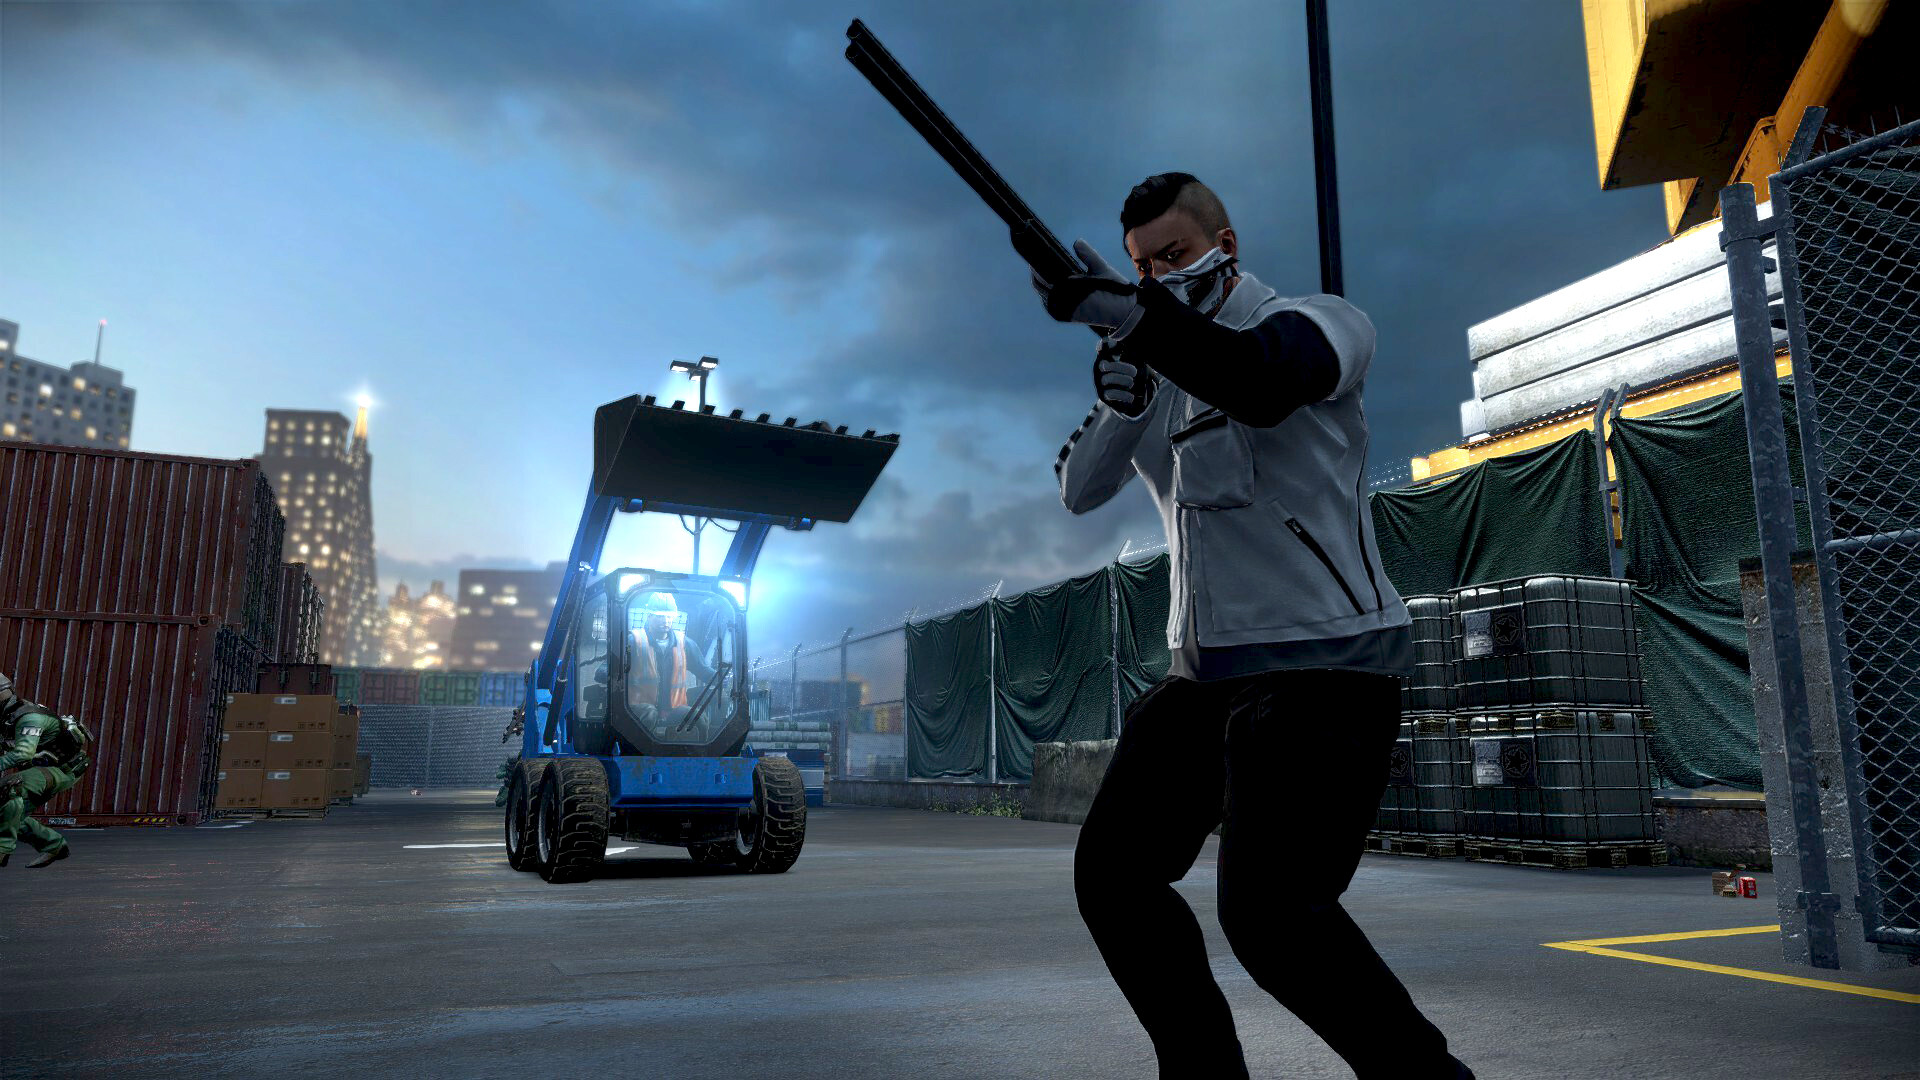 Equipment stacker and collector payday 2 фото 62